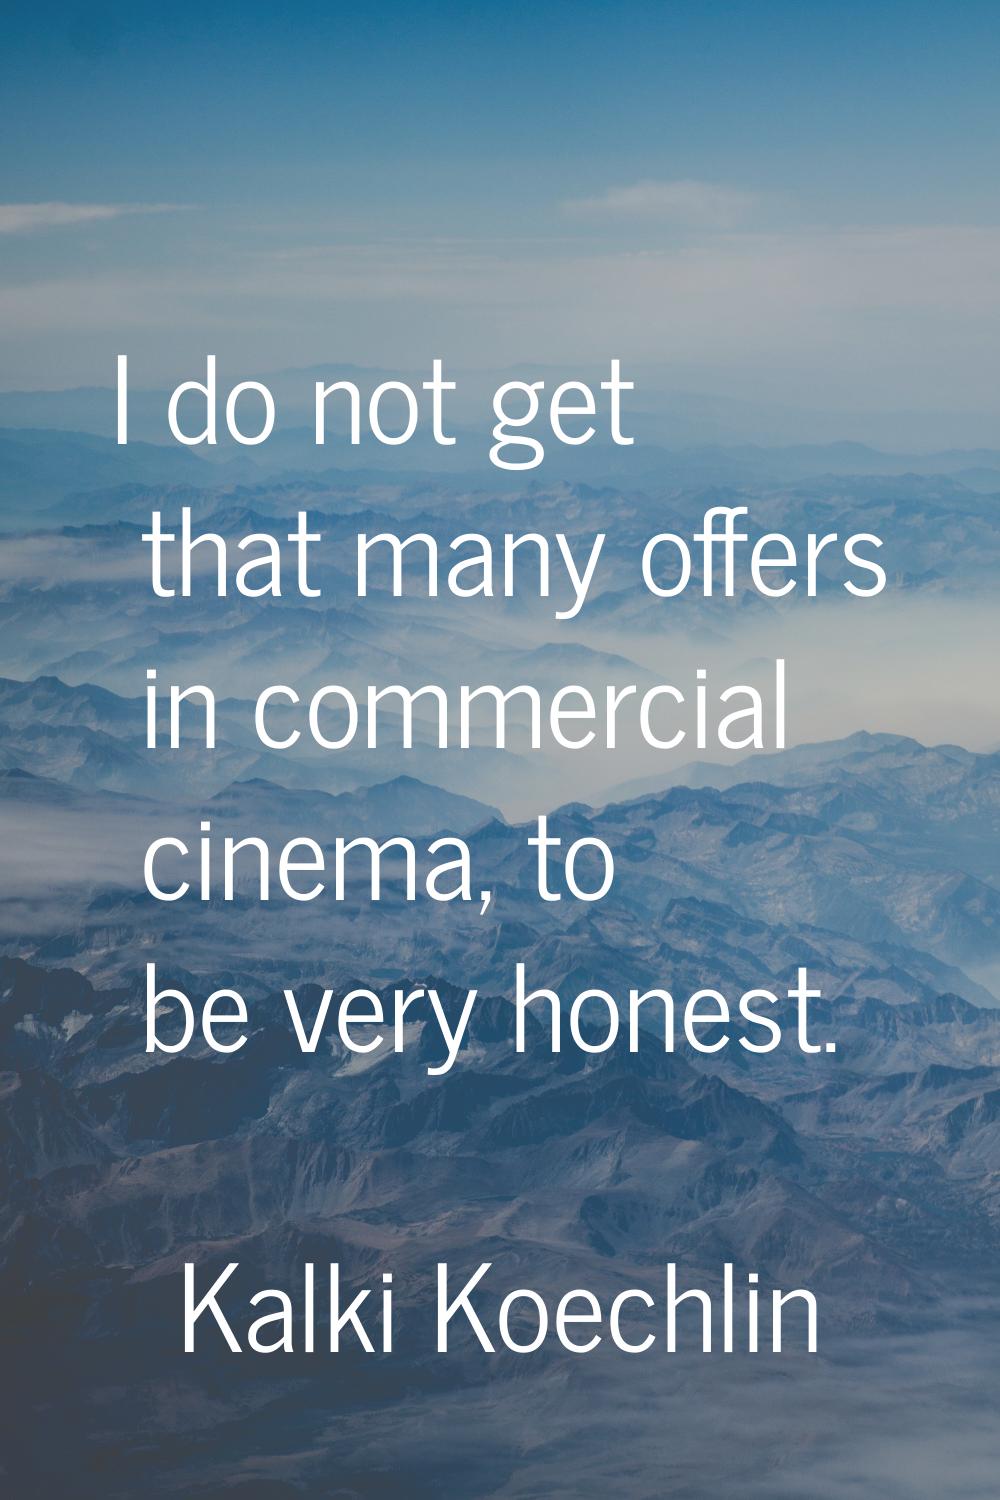 I do not get that many offers in commercial cinema, to be very honest.